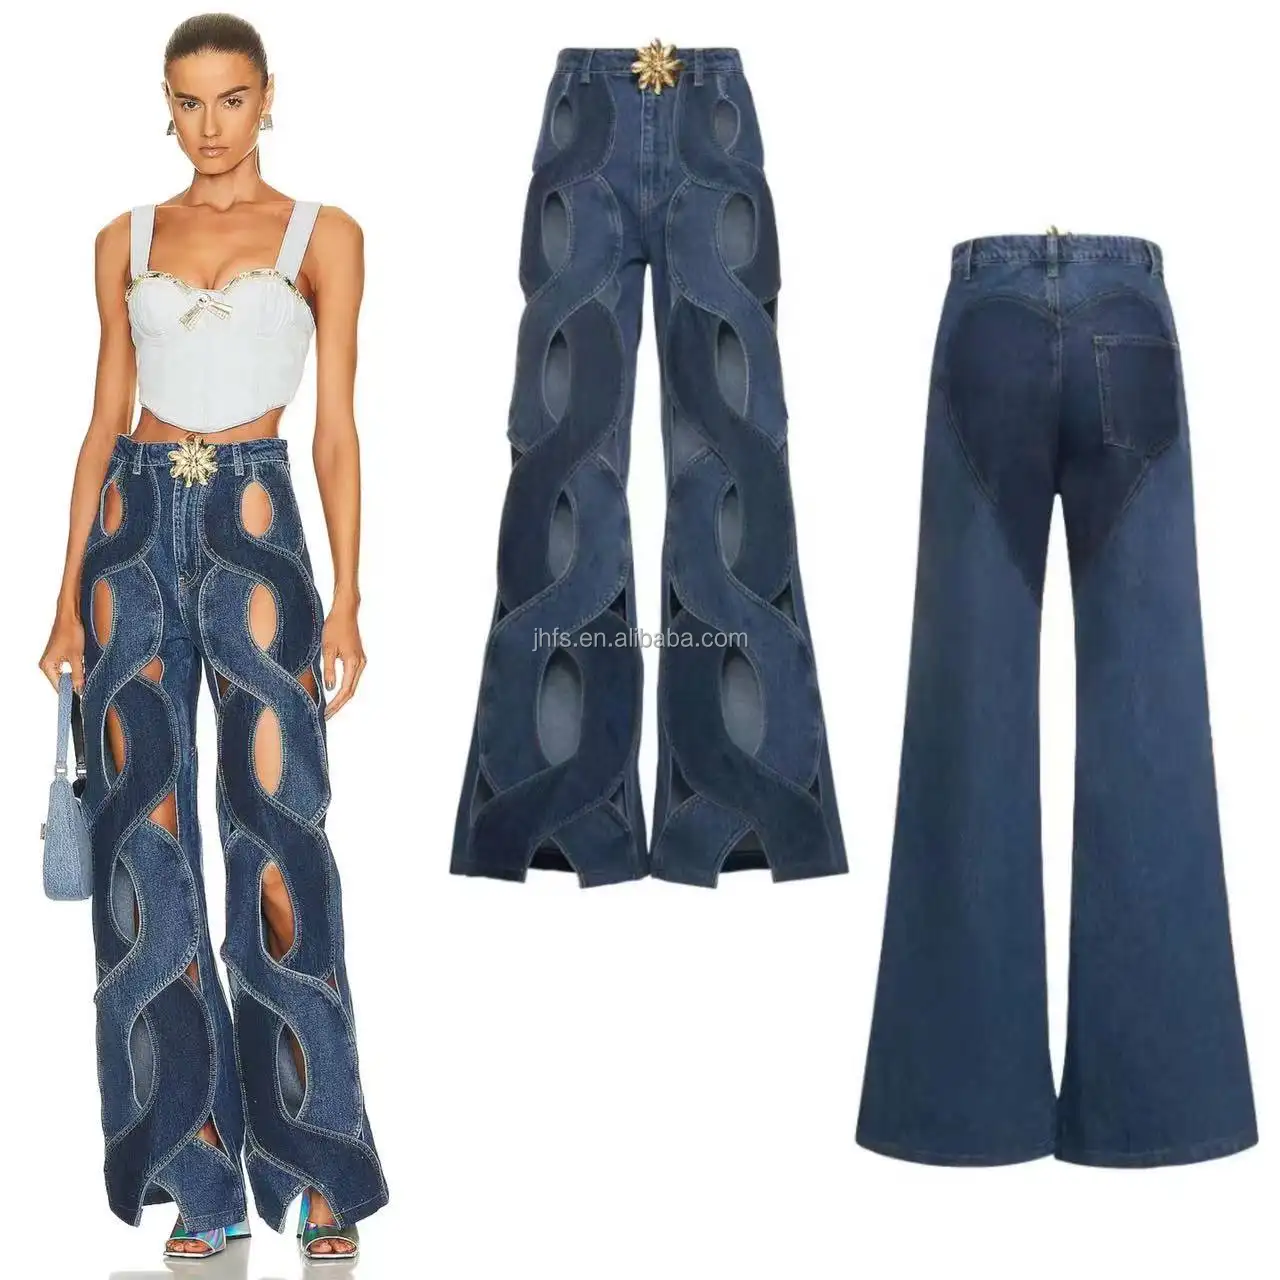 J&H summer 2023 chic hollow out cross strap jeans high waist patchwork wide leg jeans for women fashion casual denim pants